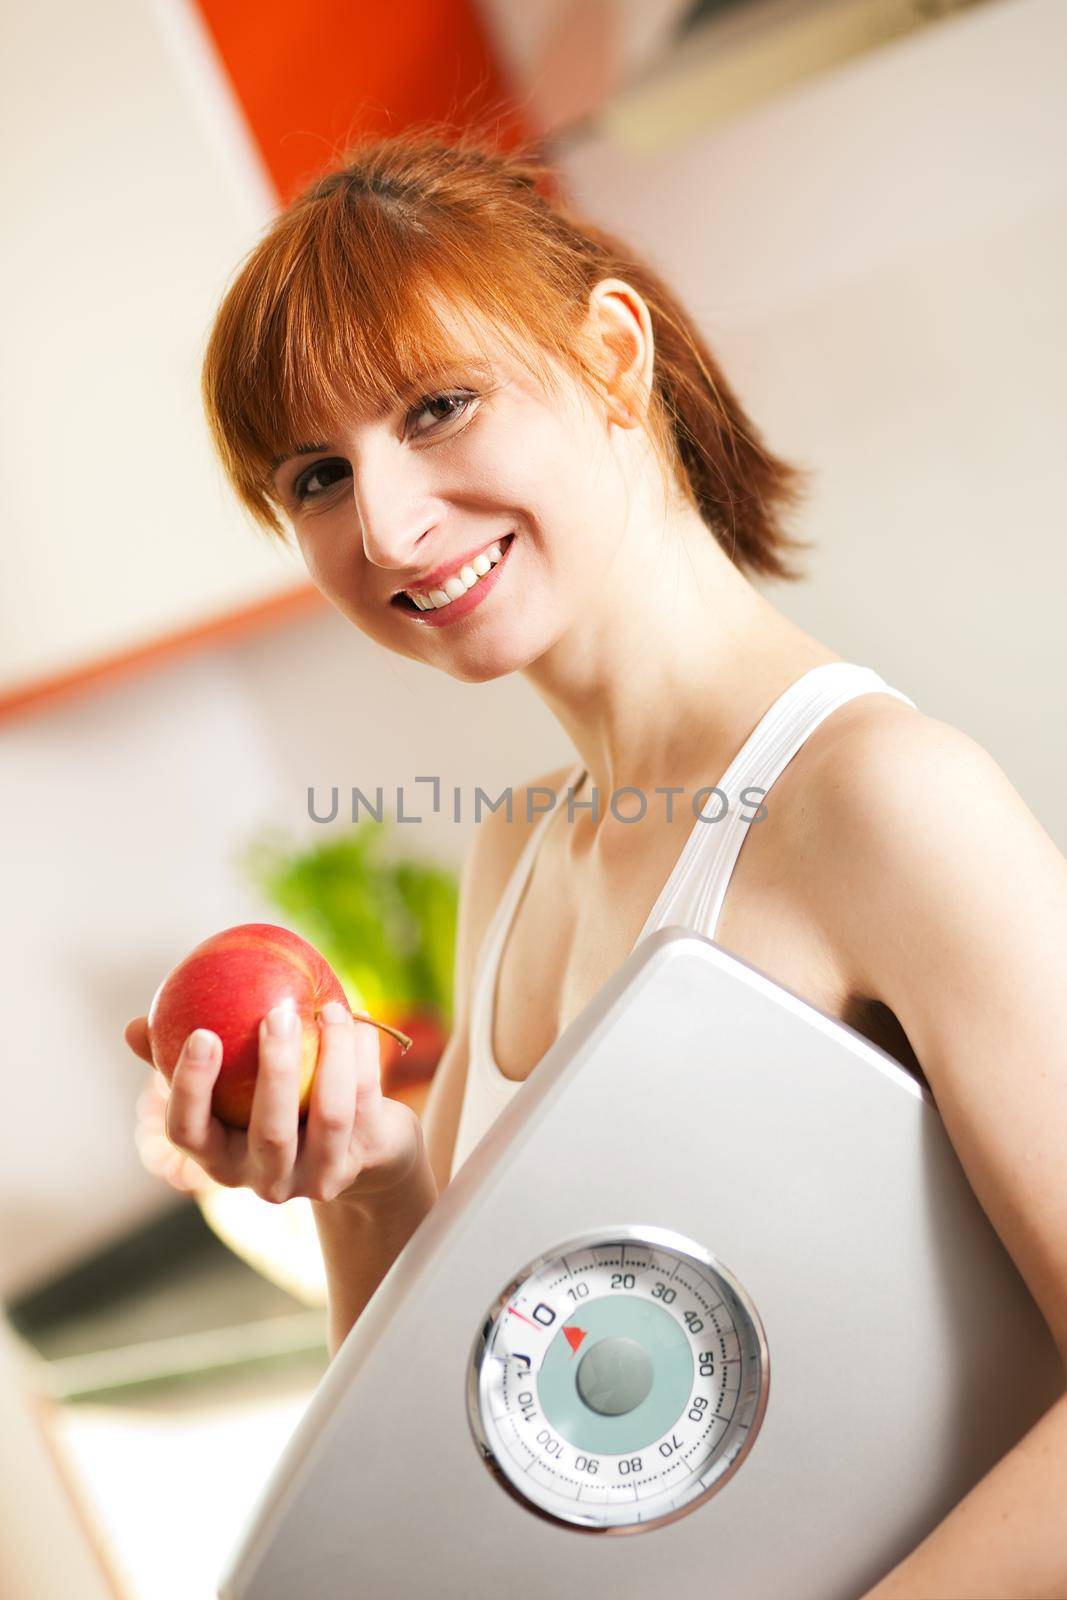 Thin and beautiful woman (only torso) measuring her waist with a tape measure, in the background fruit in a bowl